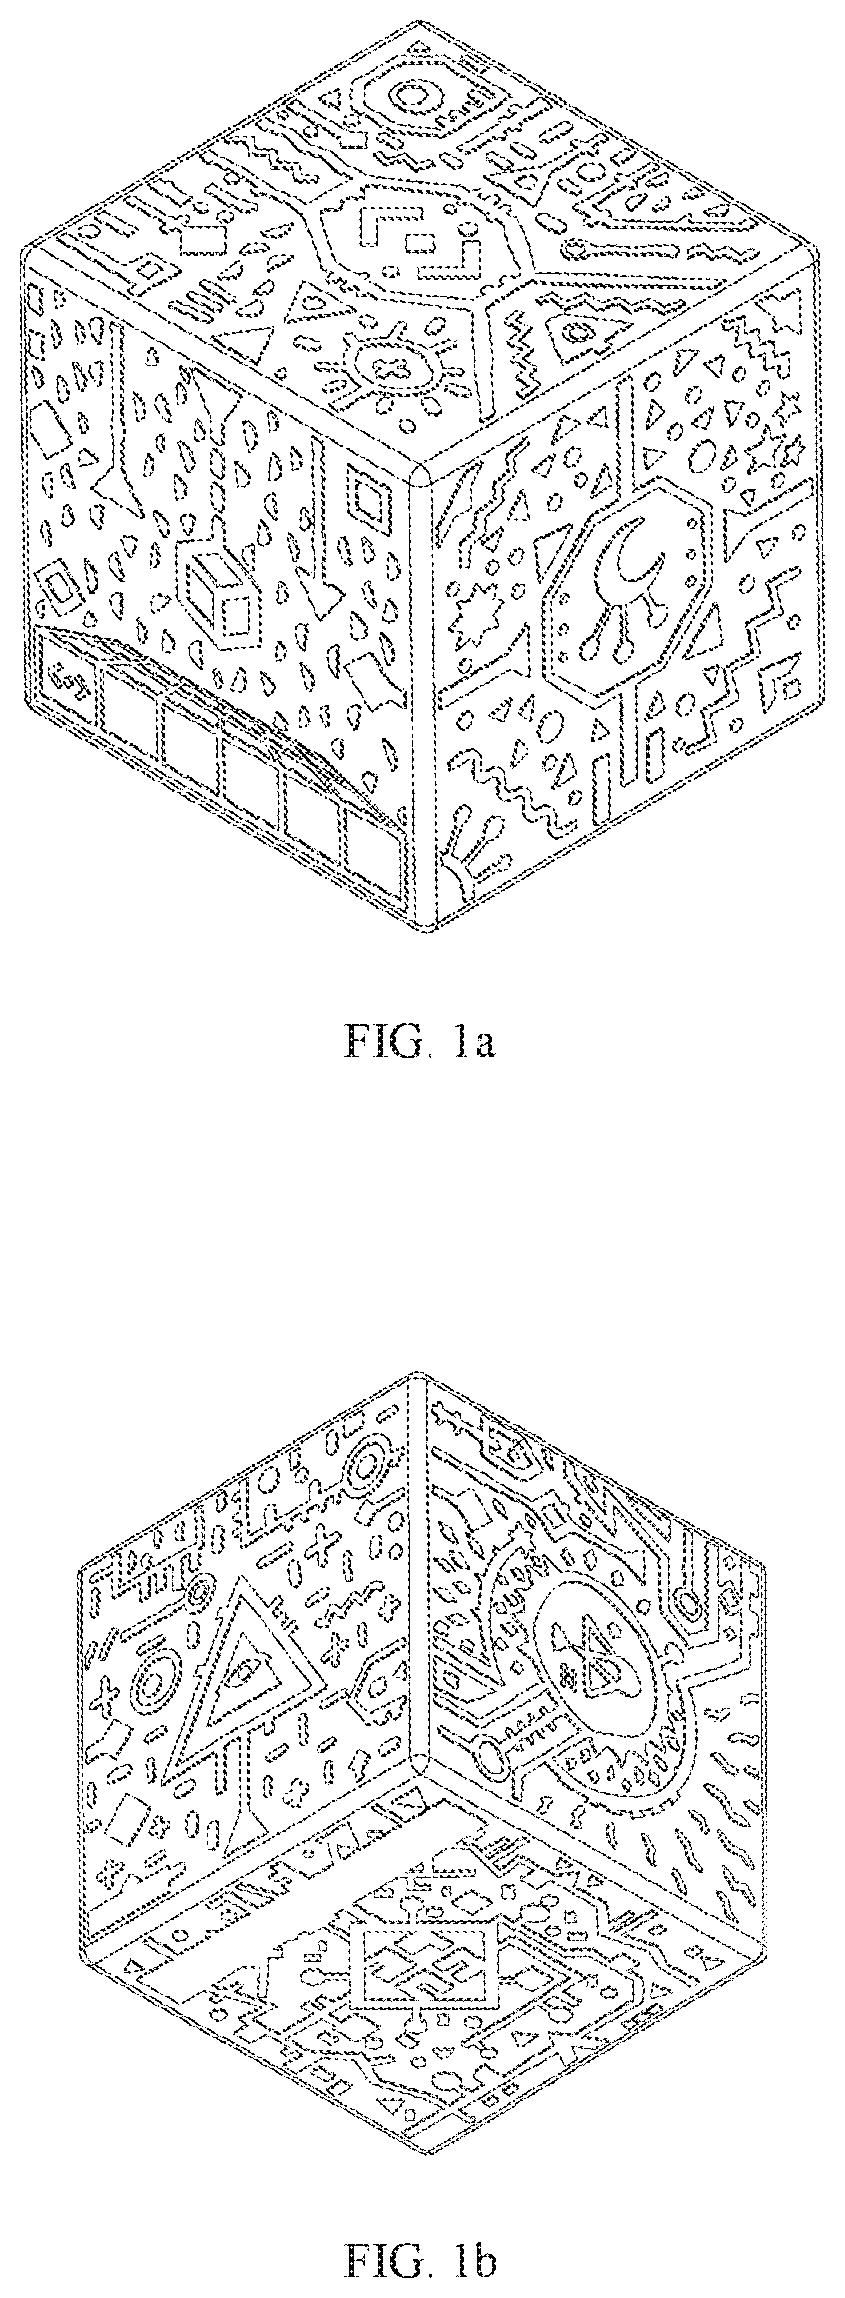 Virtual product inspection system using trackable three-dimensional object